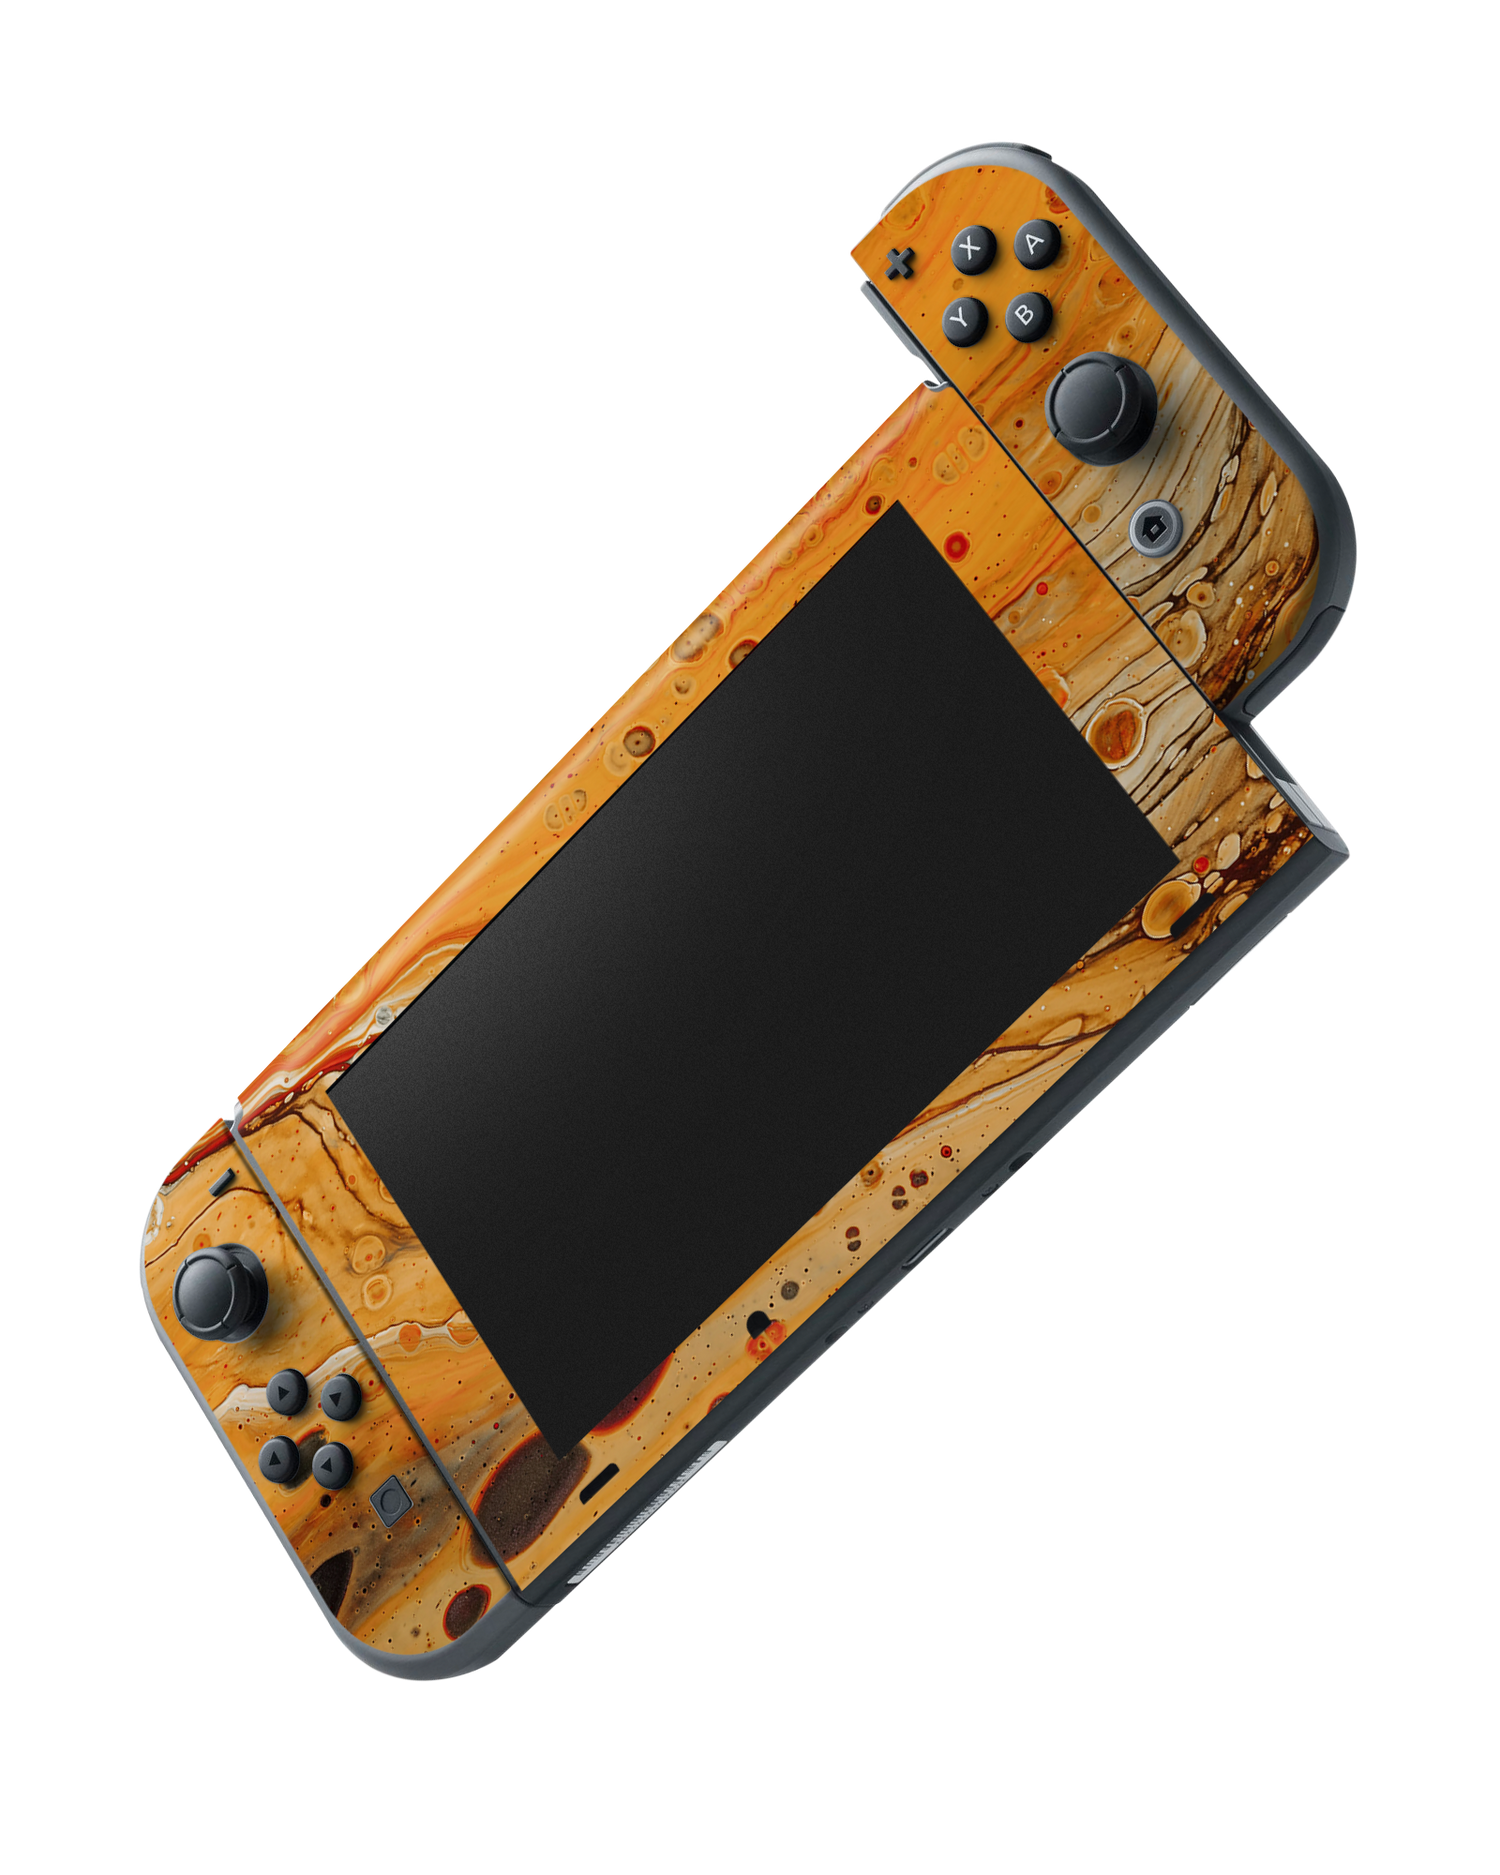 Jupiter Console Skin for Nintendo Switch: Joy-Con removing 